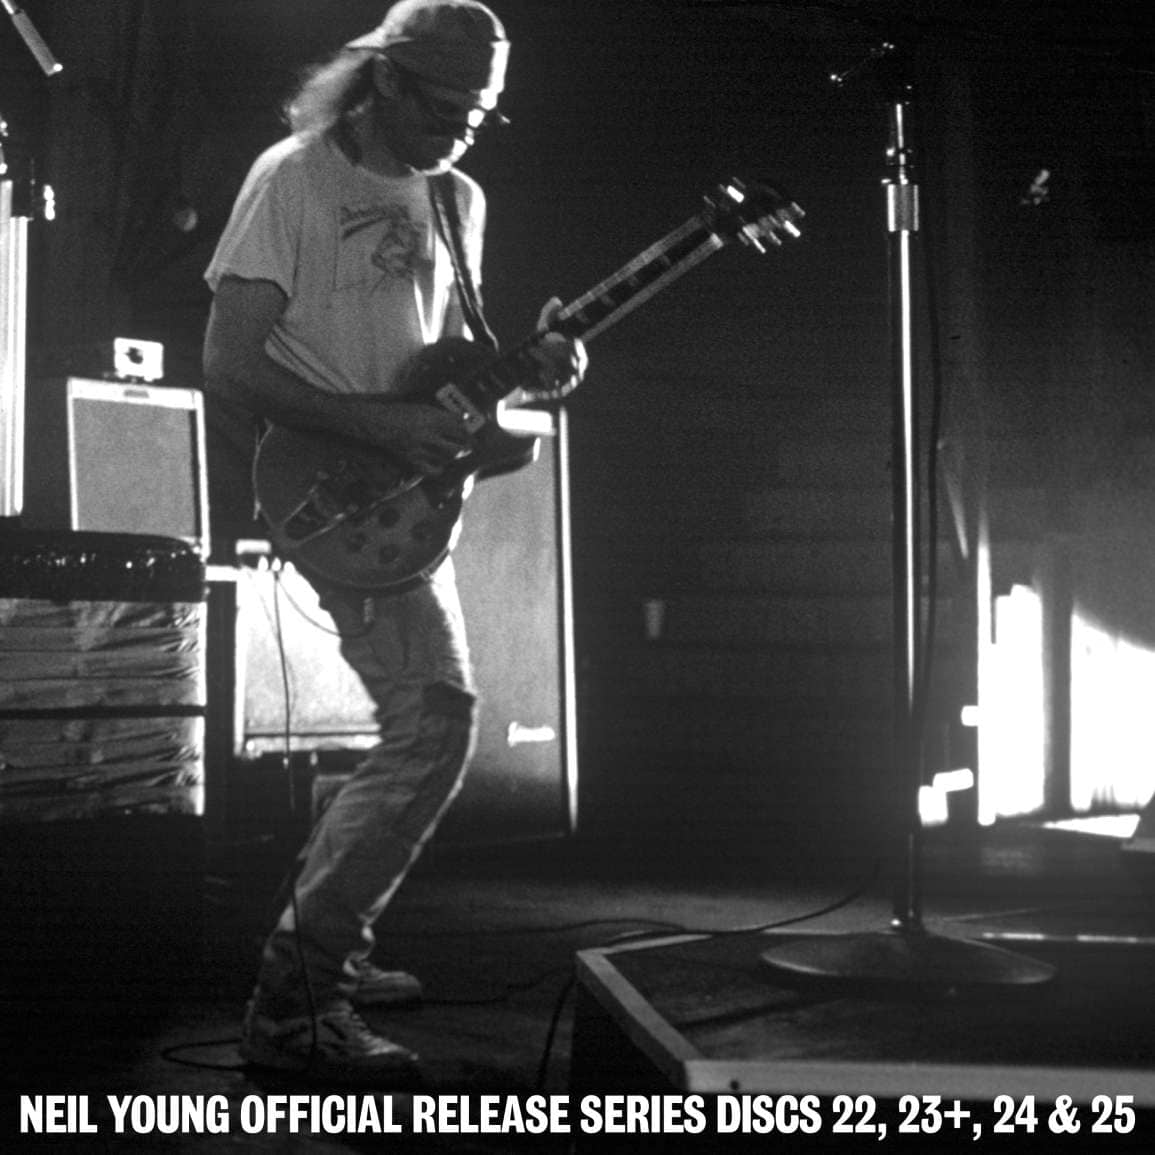 Neil Young Official Release Series Discs 22, 23, 24, 24